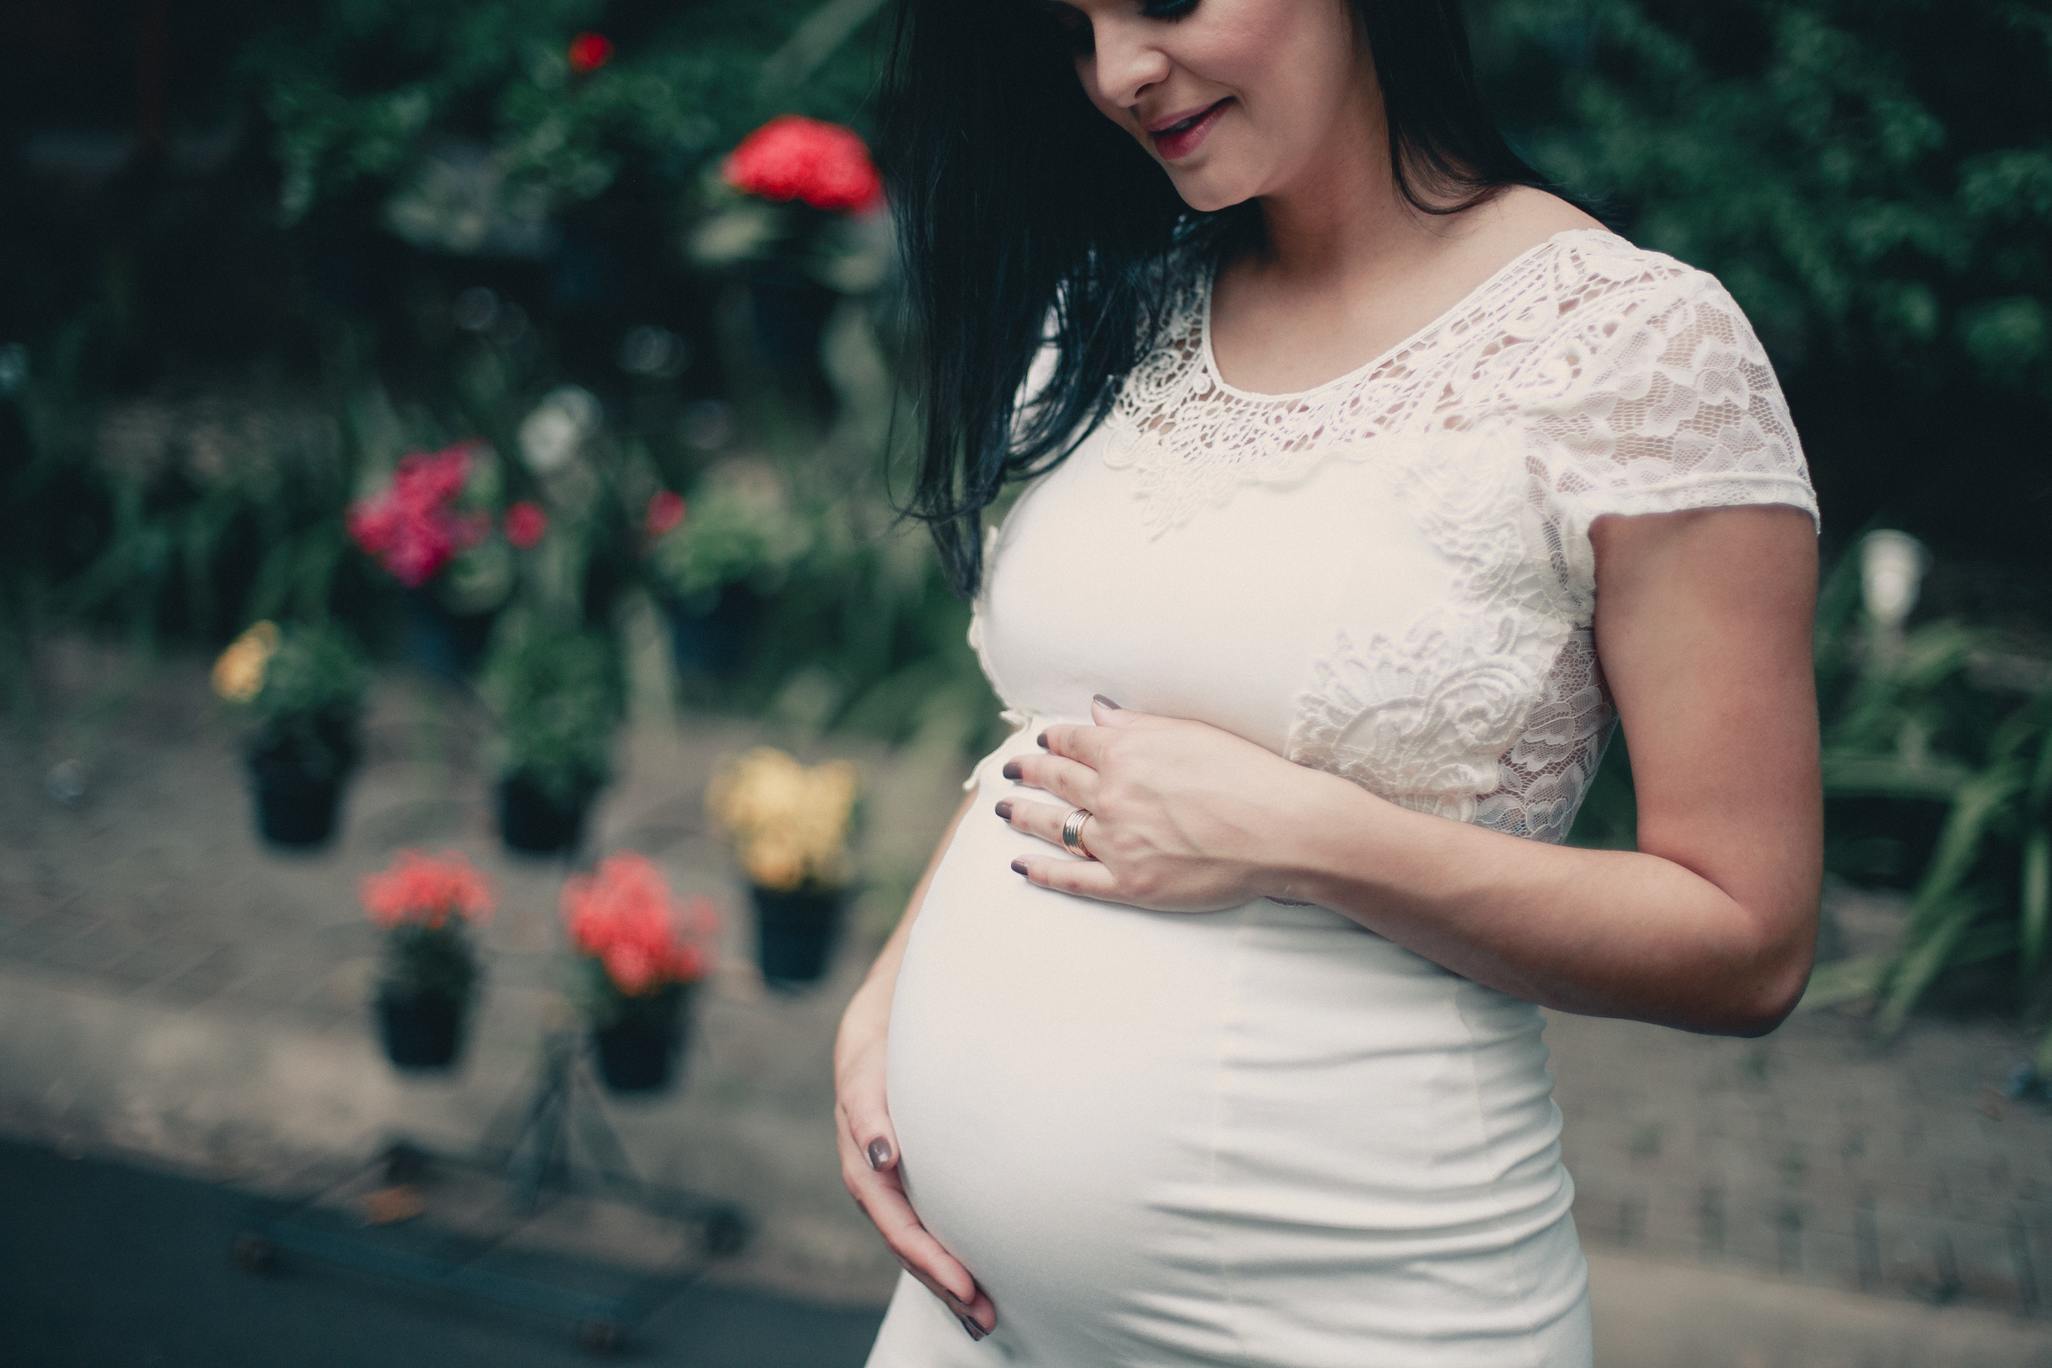 Pregnant woman in white lace dress looking down